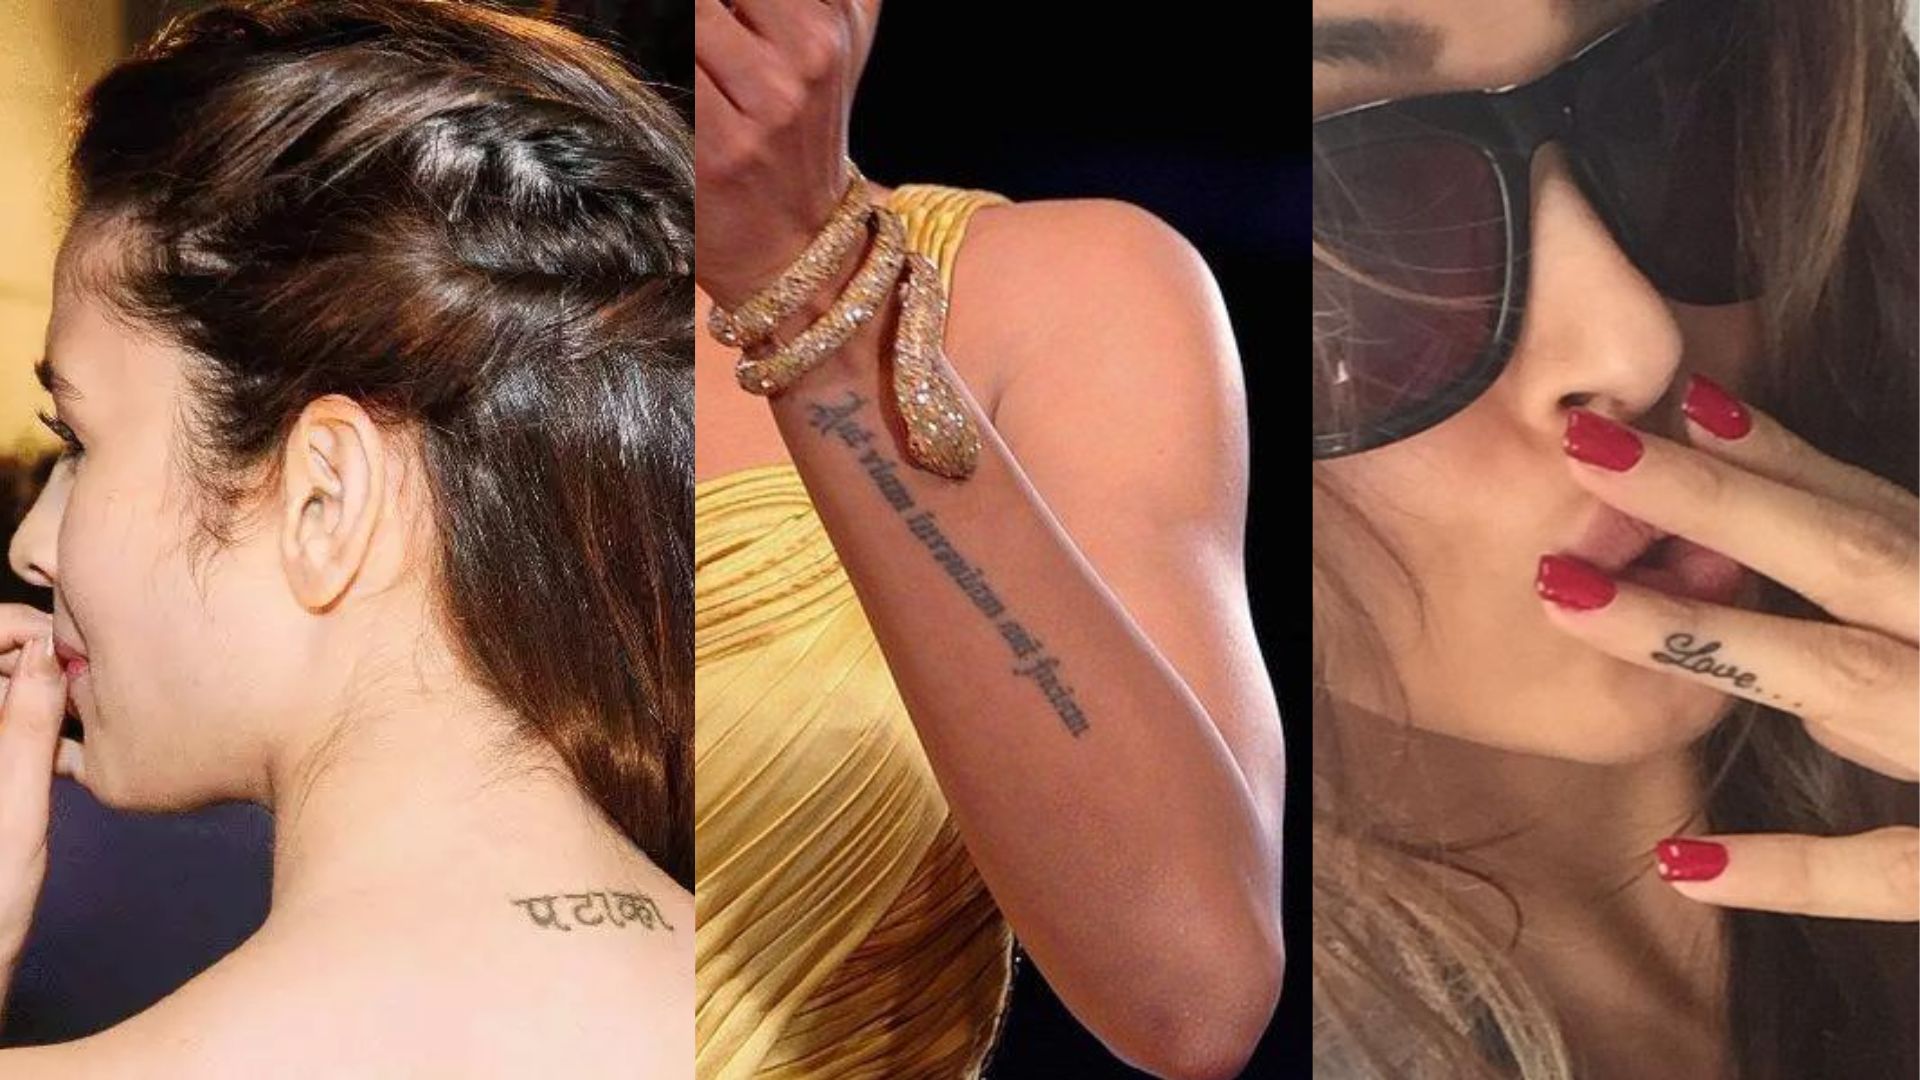 6 Celebrity Tattoos You've Never Noticed Before, To Inspire Your Next Ink